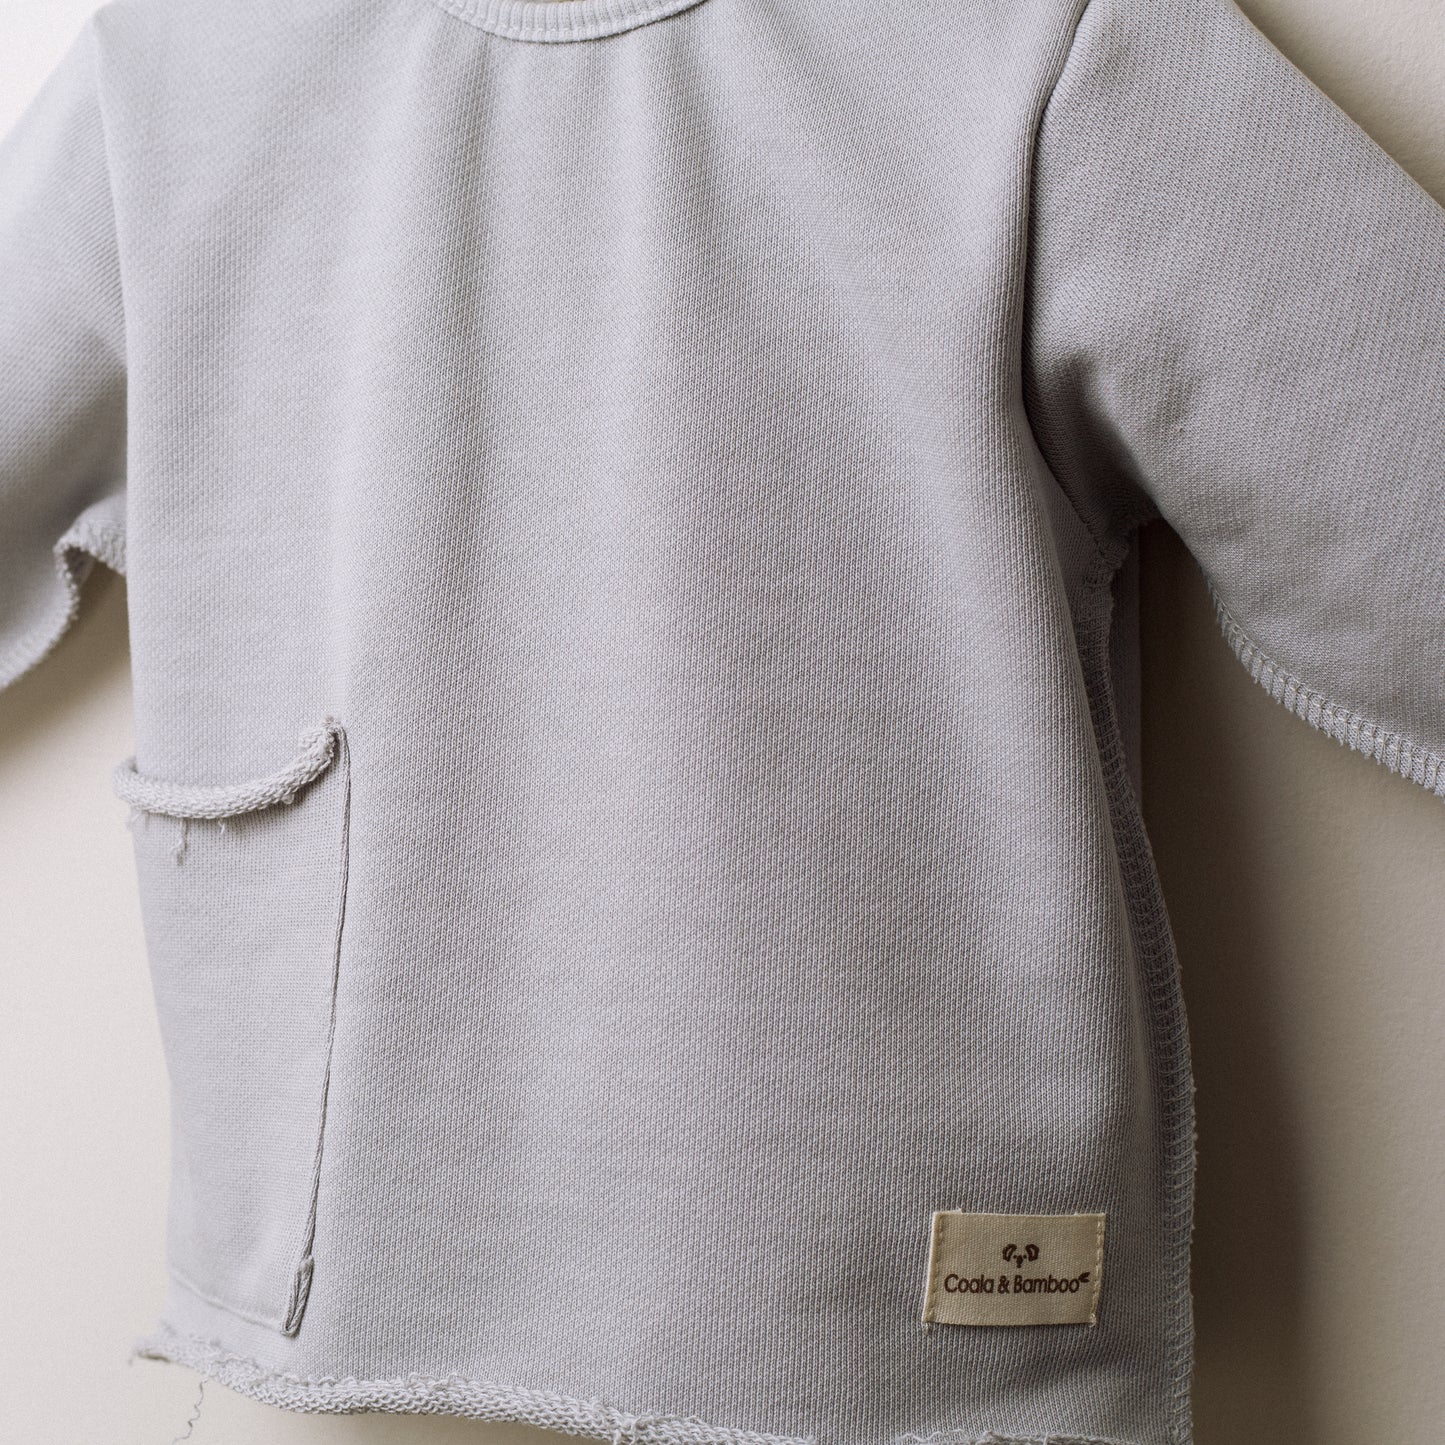 Winter cotton Long Sleeve Set -Aged 3m to 4 Year- Colored Grey-Black